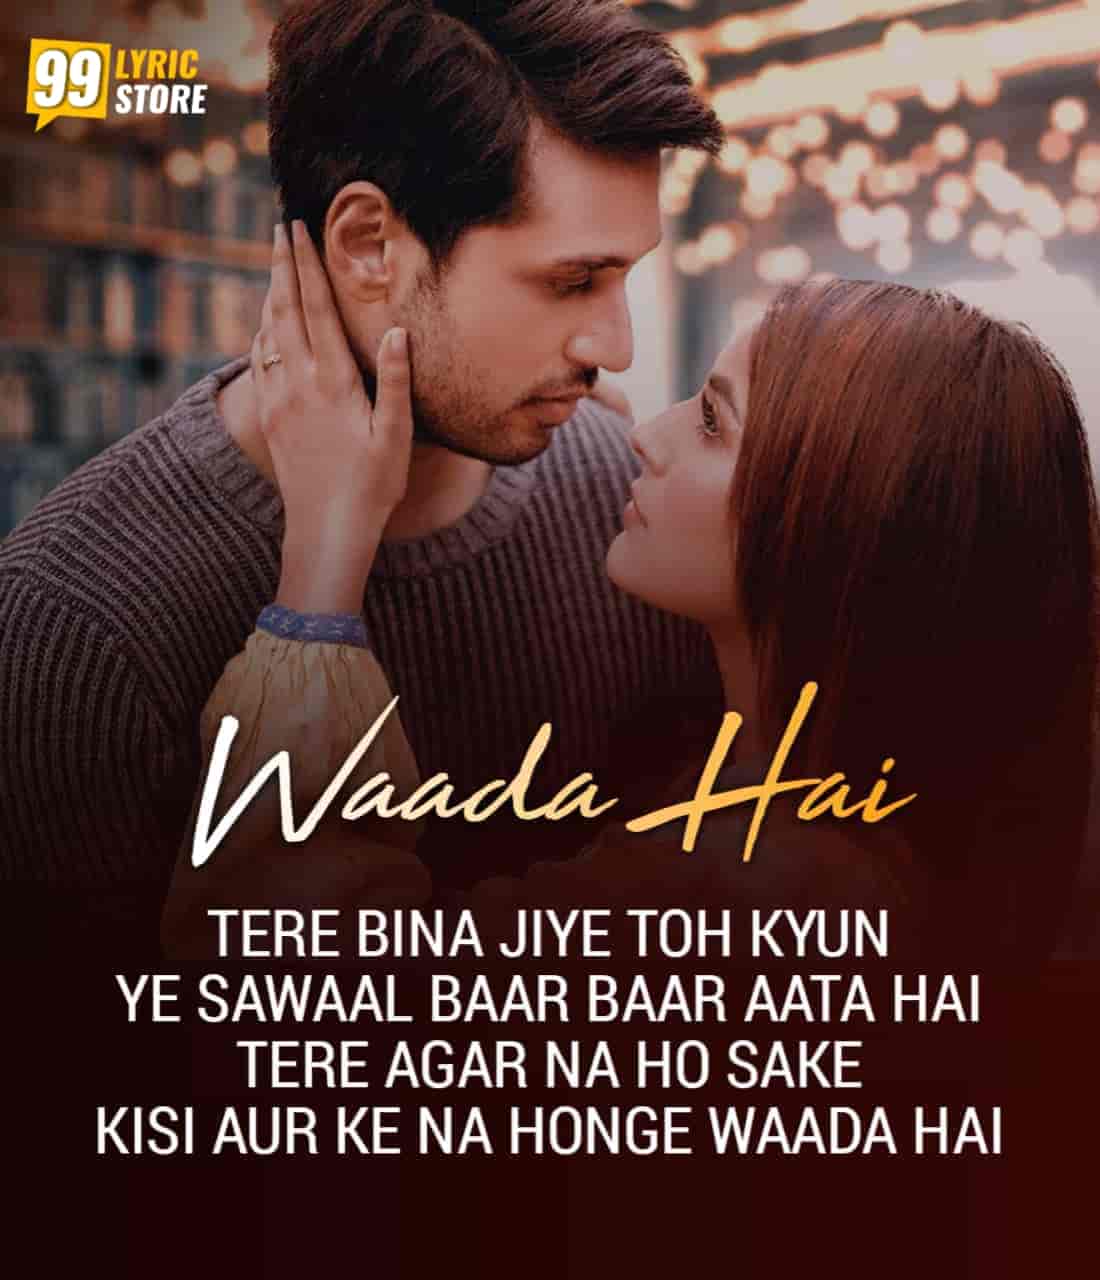 A very beautiful most awaited love hindi song Waada Hai has finally released which is sung in the melodious voice of Arjun Kanungo.